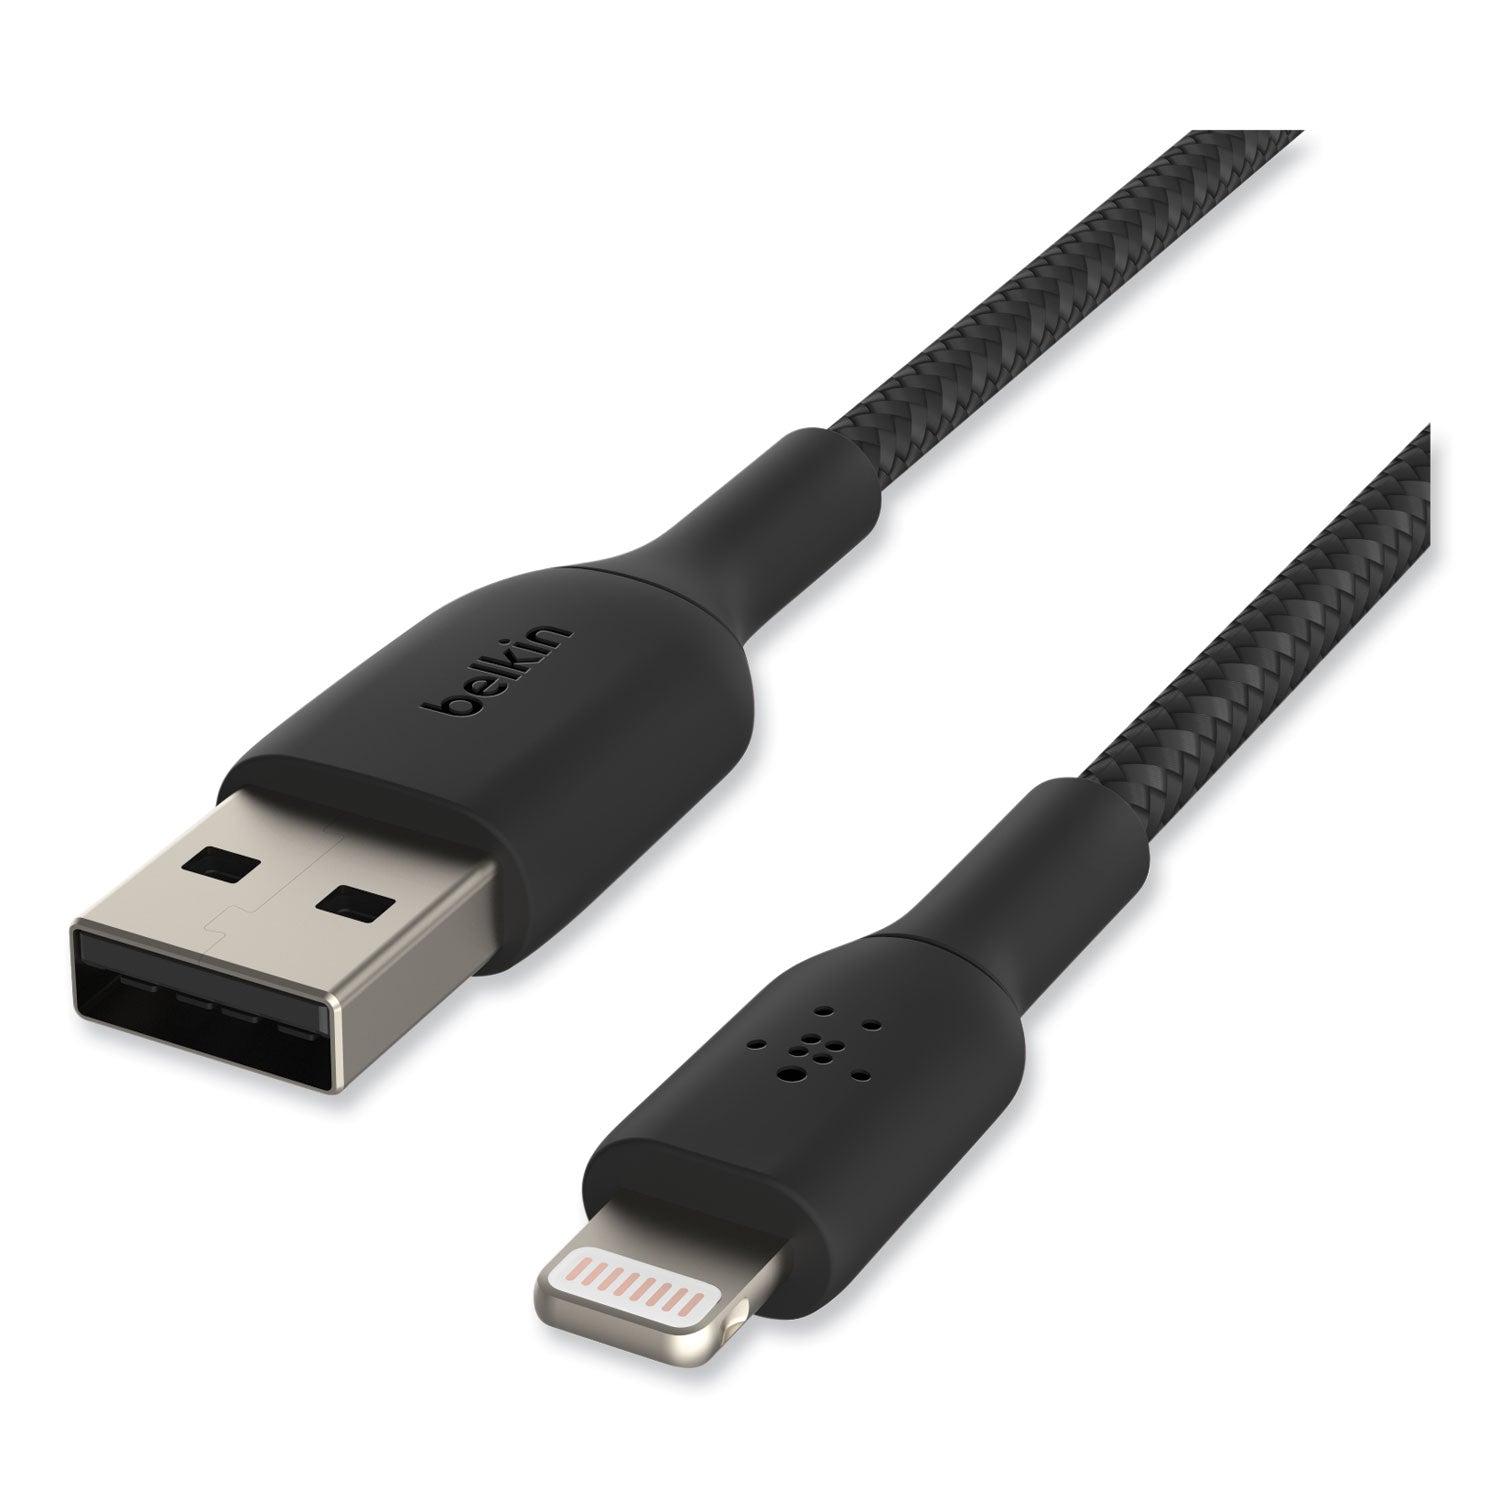 boost-charge-braided-apple-lightning-to-usb-a-chargesync-cable-66-ft-black_blkcaa002bt2mbk - 6